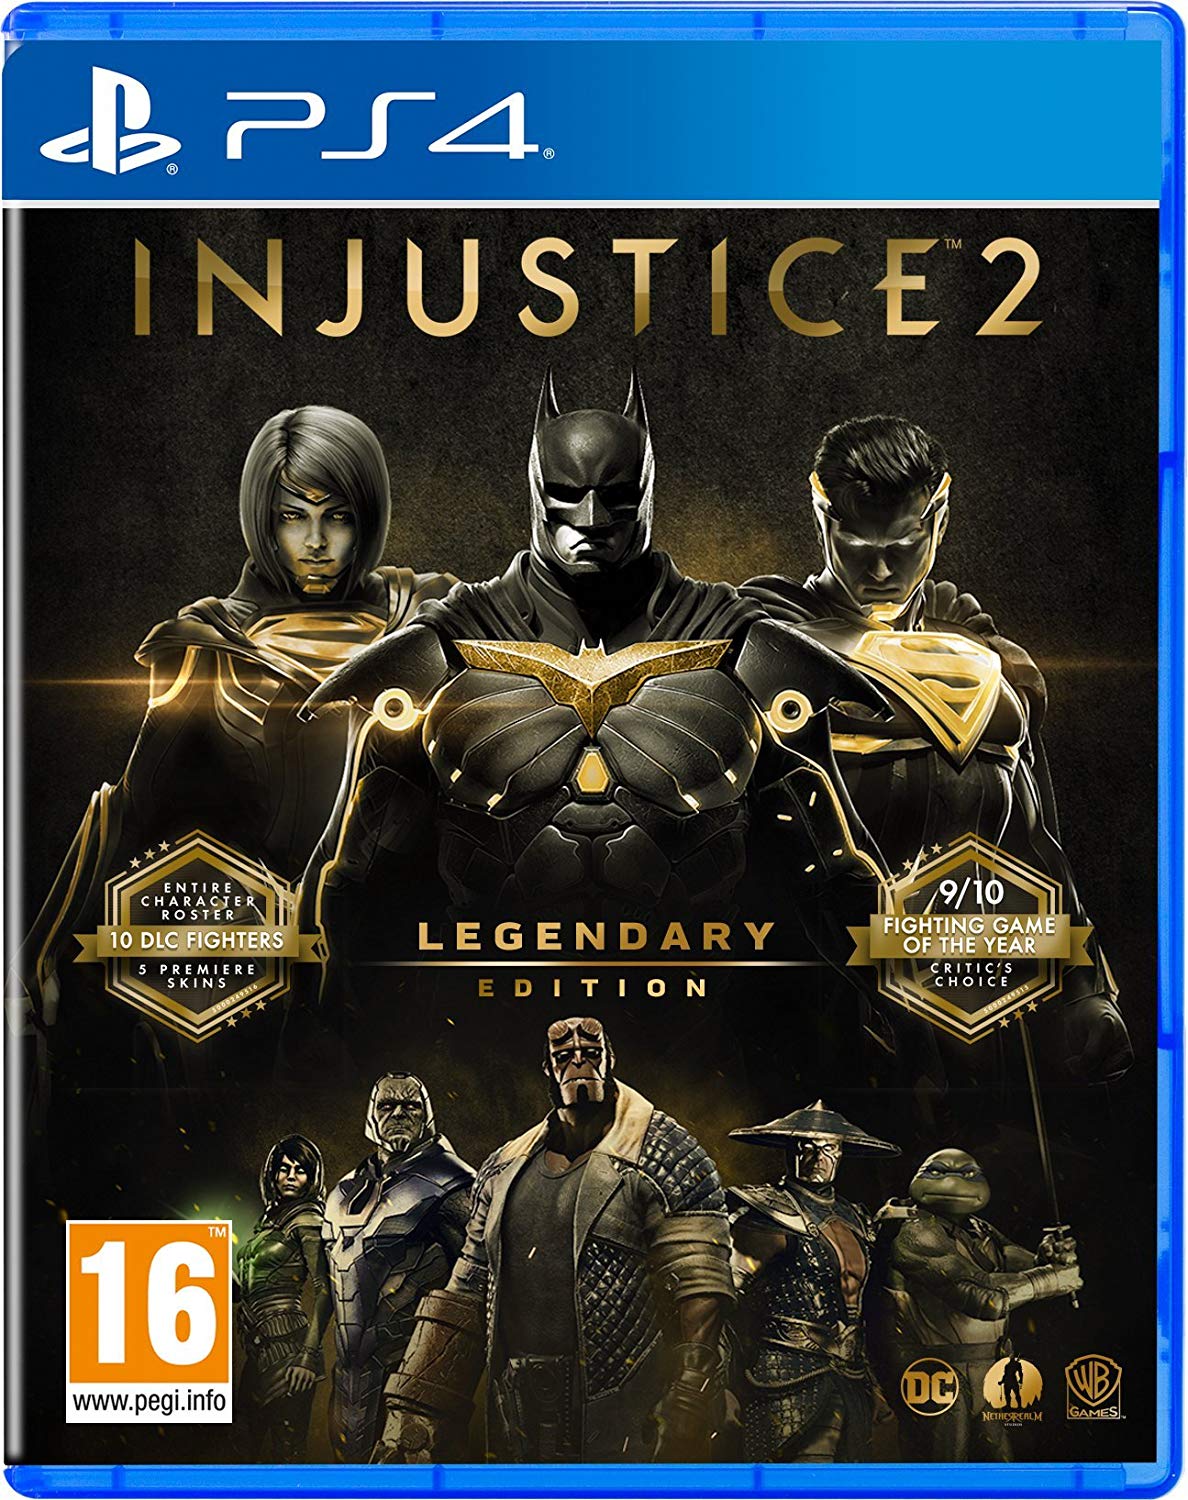 [PS4] Injustice 2 - Legendary Edition (OFW 4.55+) (2017) [ENG]